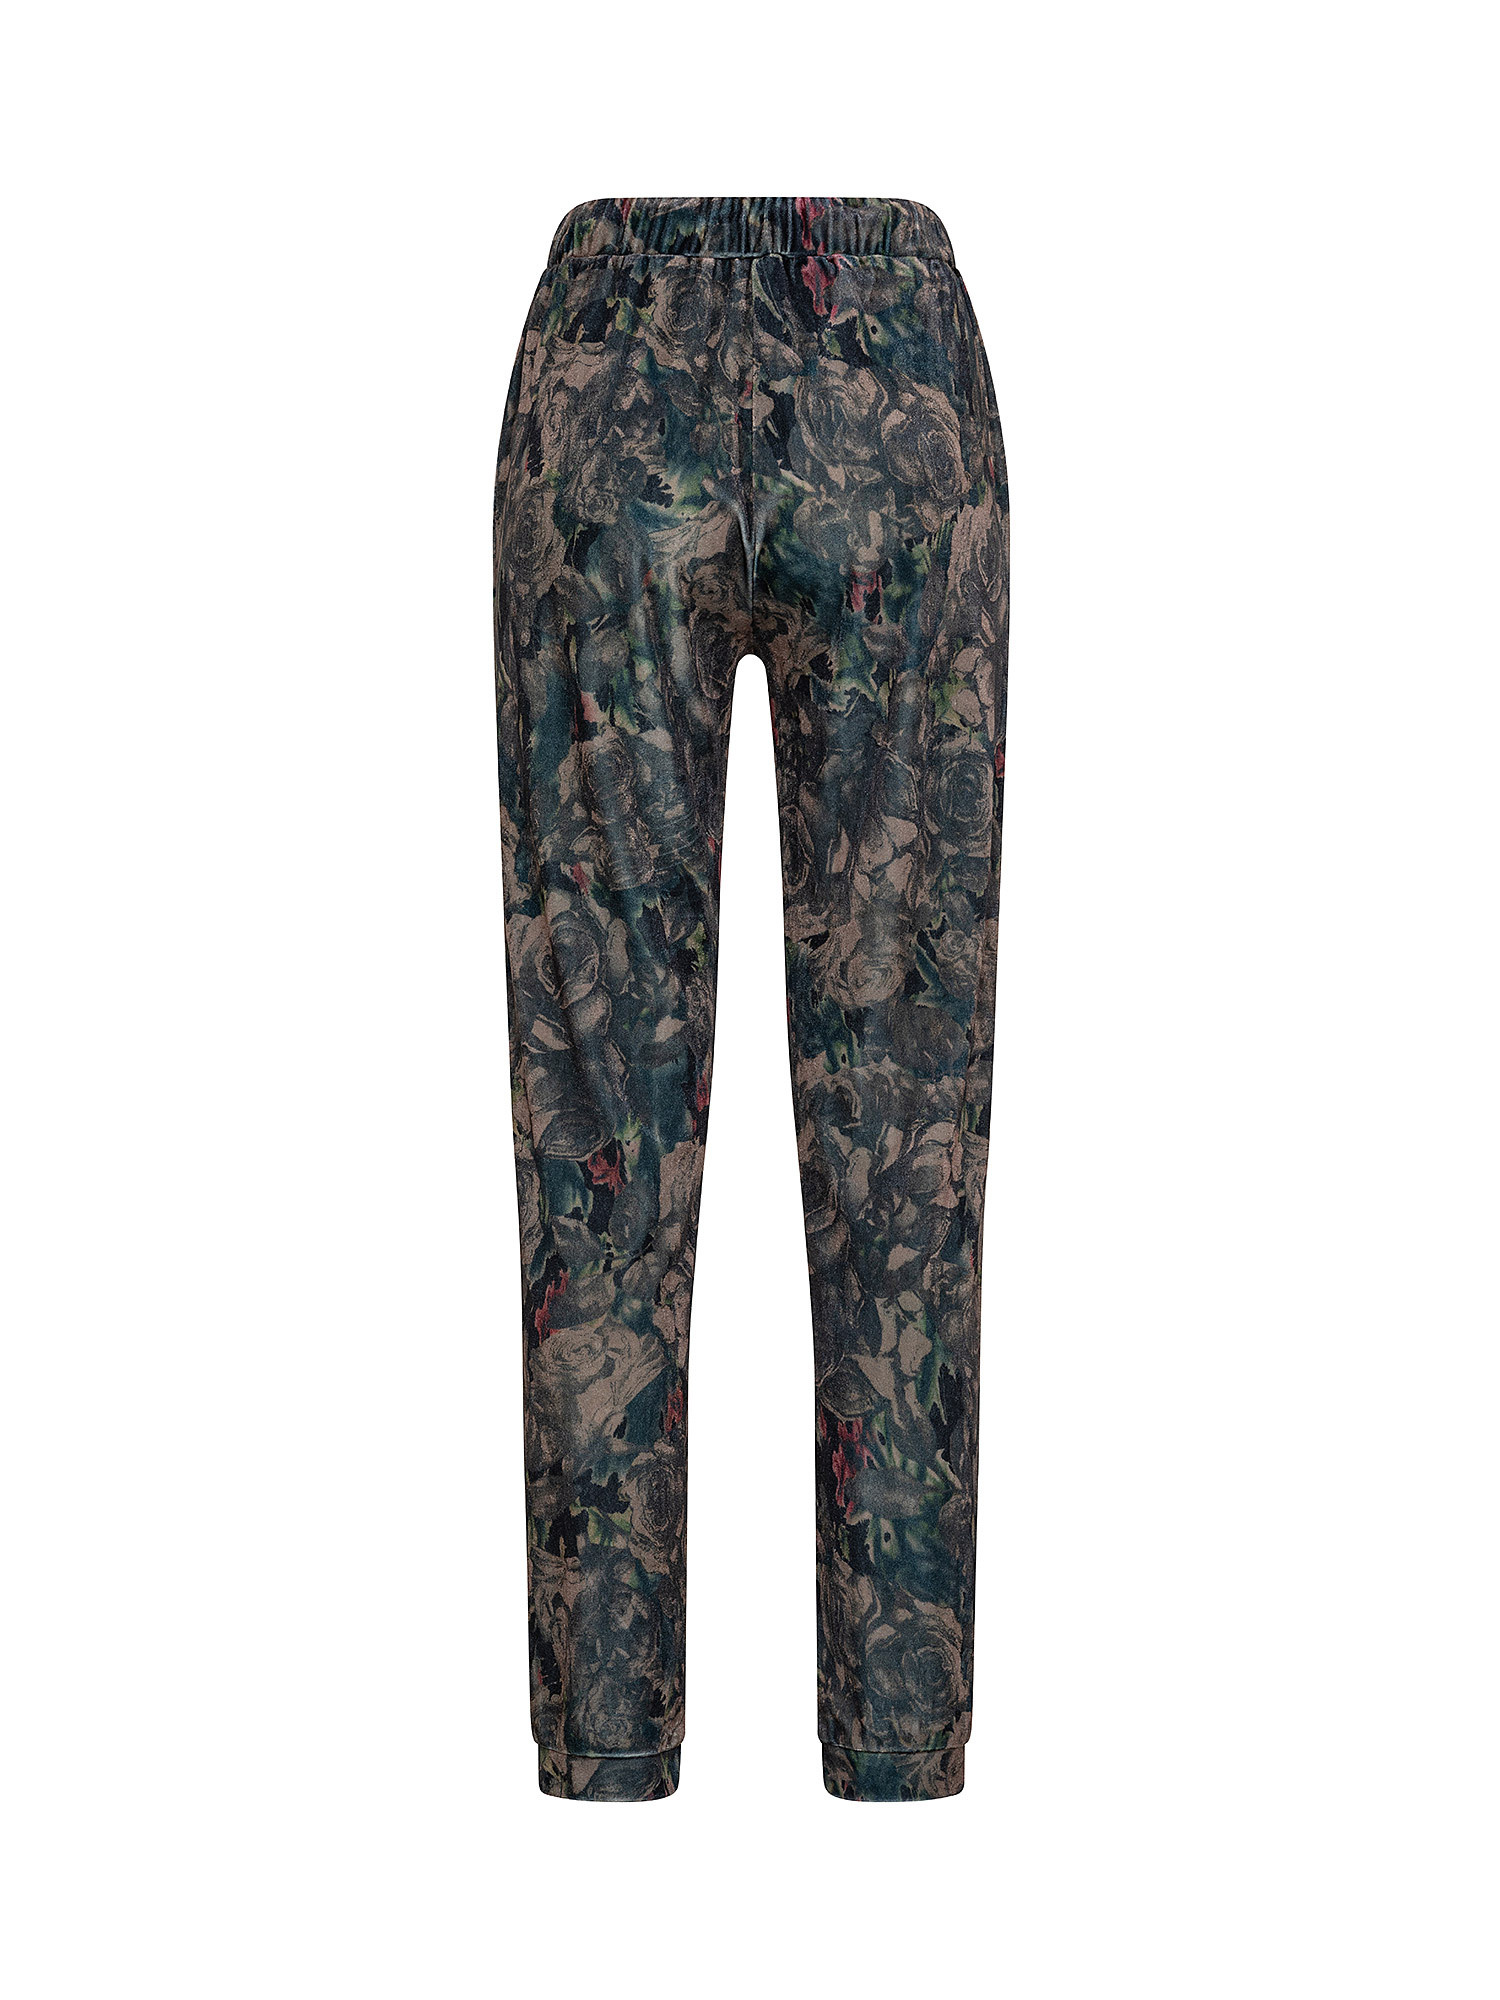 Chenille trousers, Multicolor, large image number 1